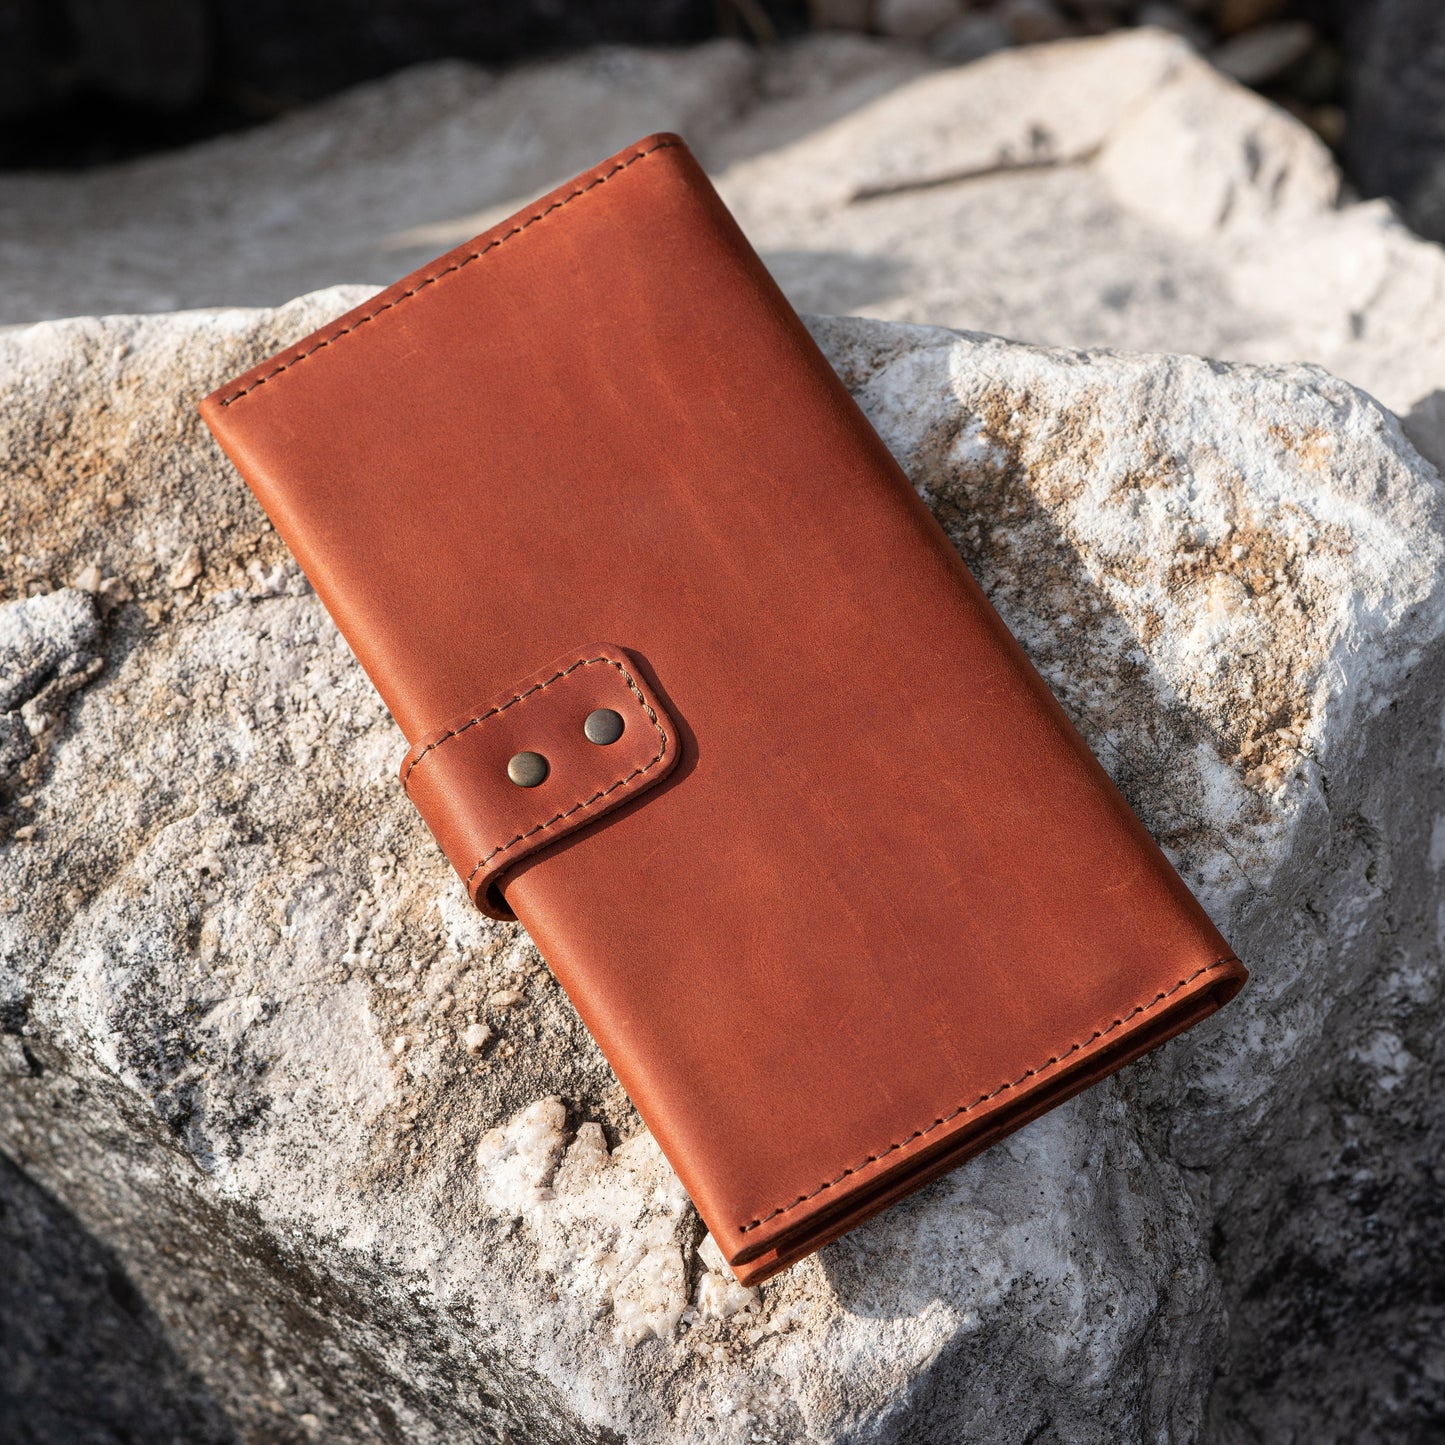 Handmade Leather Wallet with Zip Coin Pouch and Card Slots - Classic Elegance